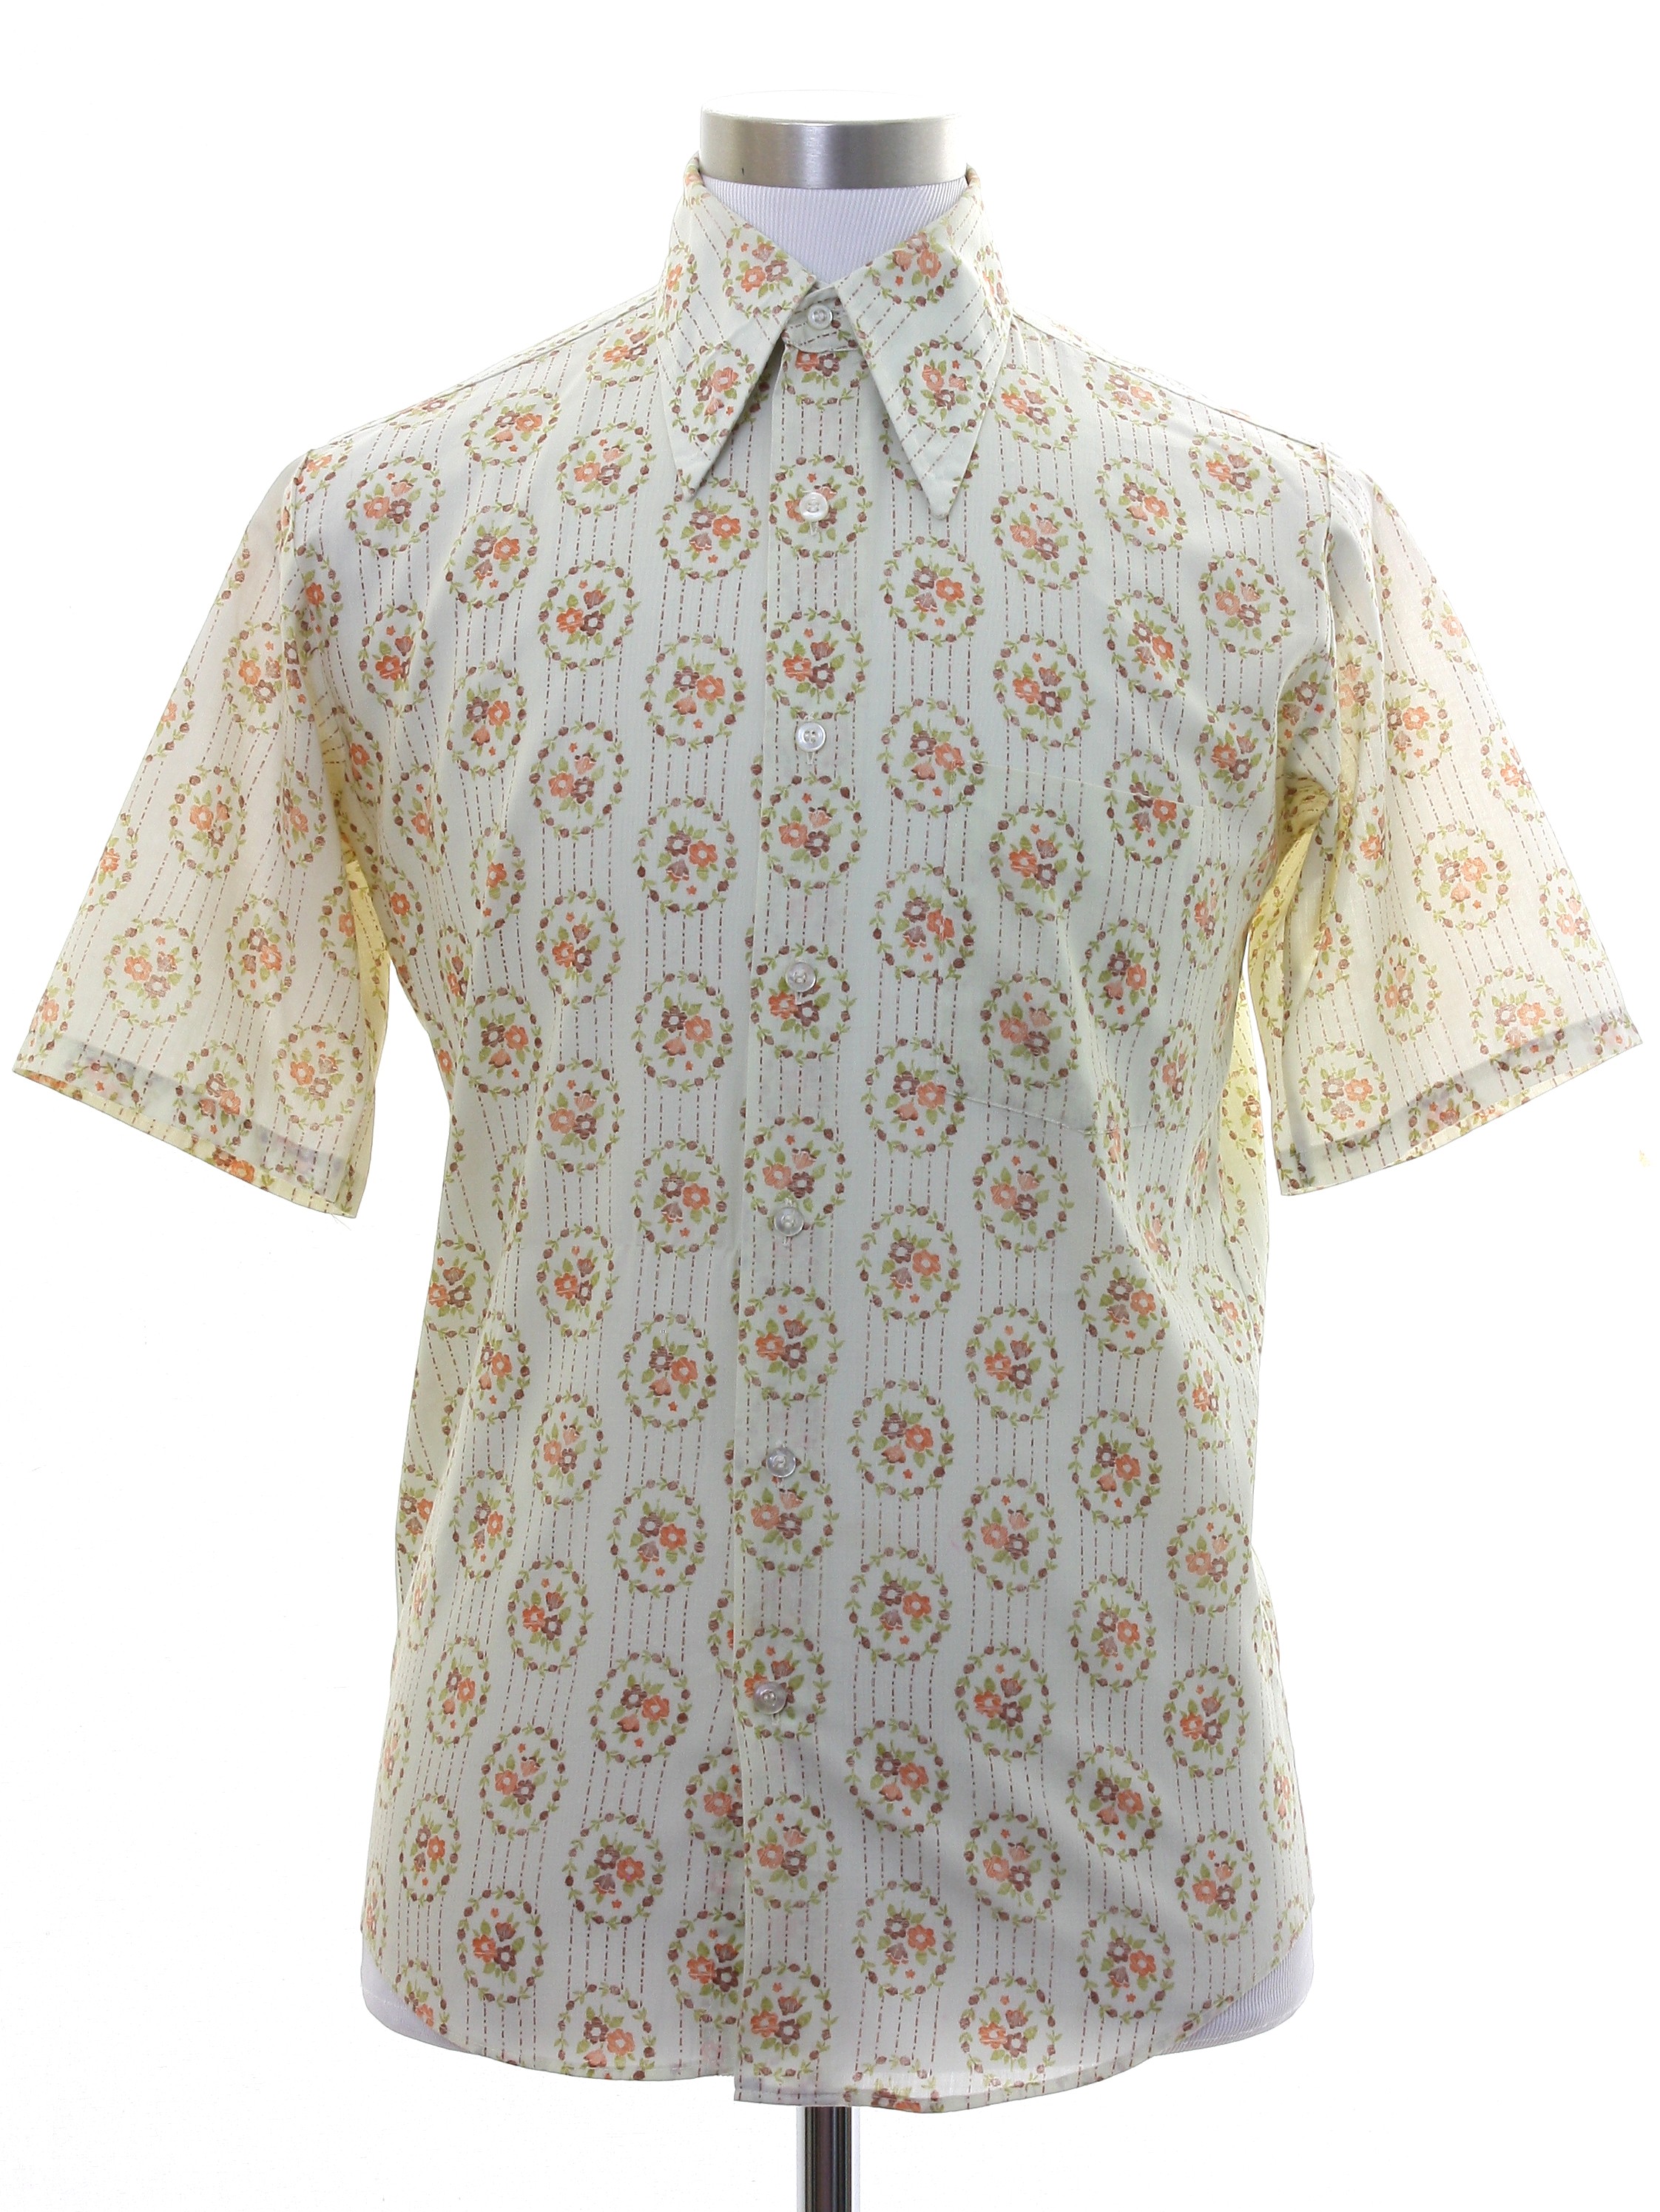 Retro 1970's Shirt (Towncraft) : Early 70s -Towncraft- Mens off white ...